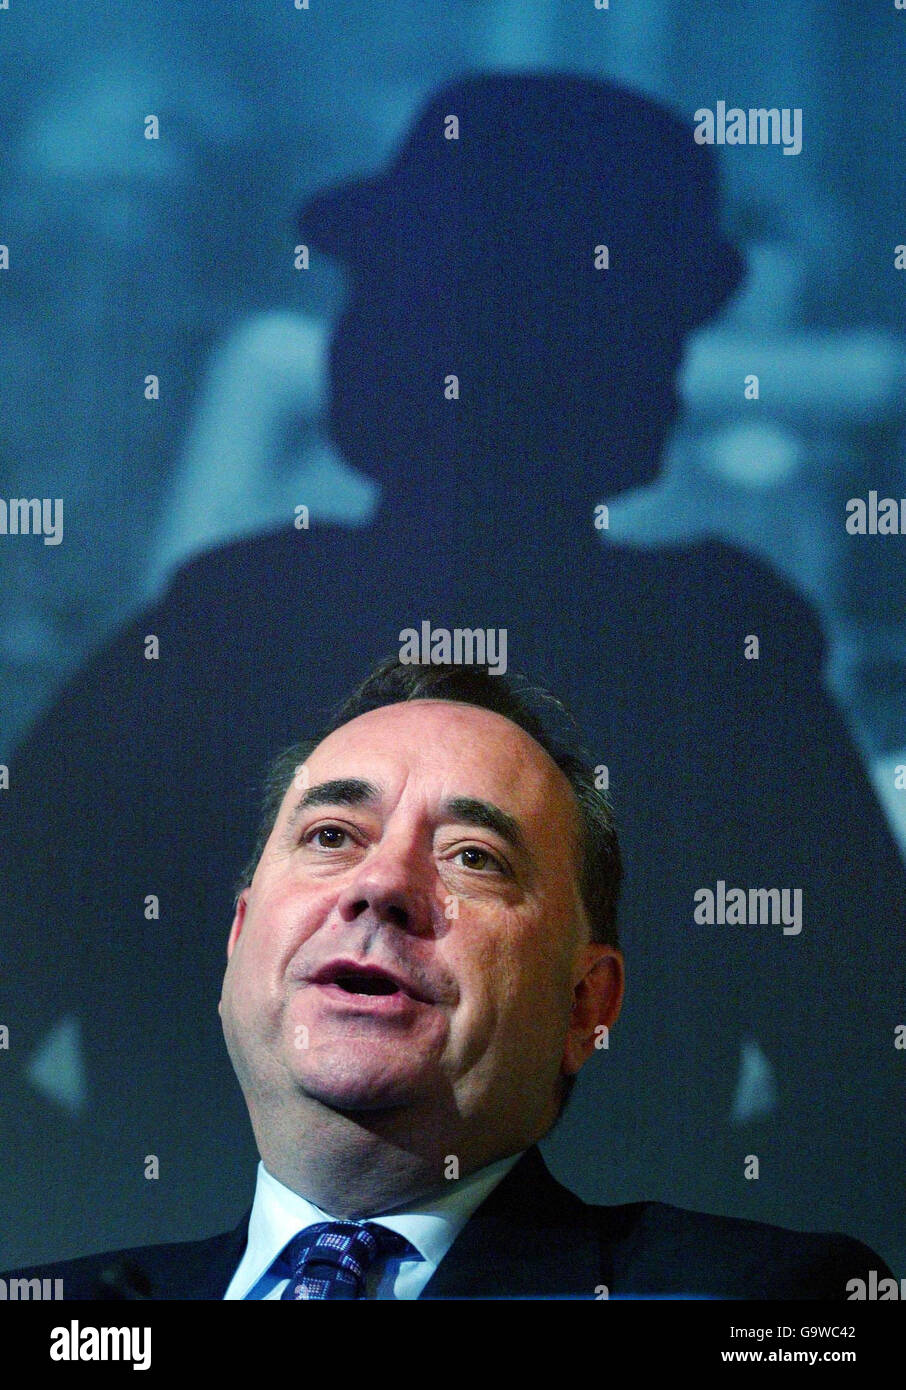 Scottish National Party leader Alex Salmond speaks at the Scottish Police Federation conference in Peebles. Stock Photo